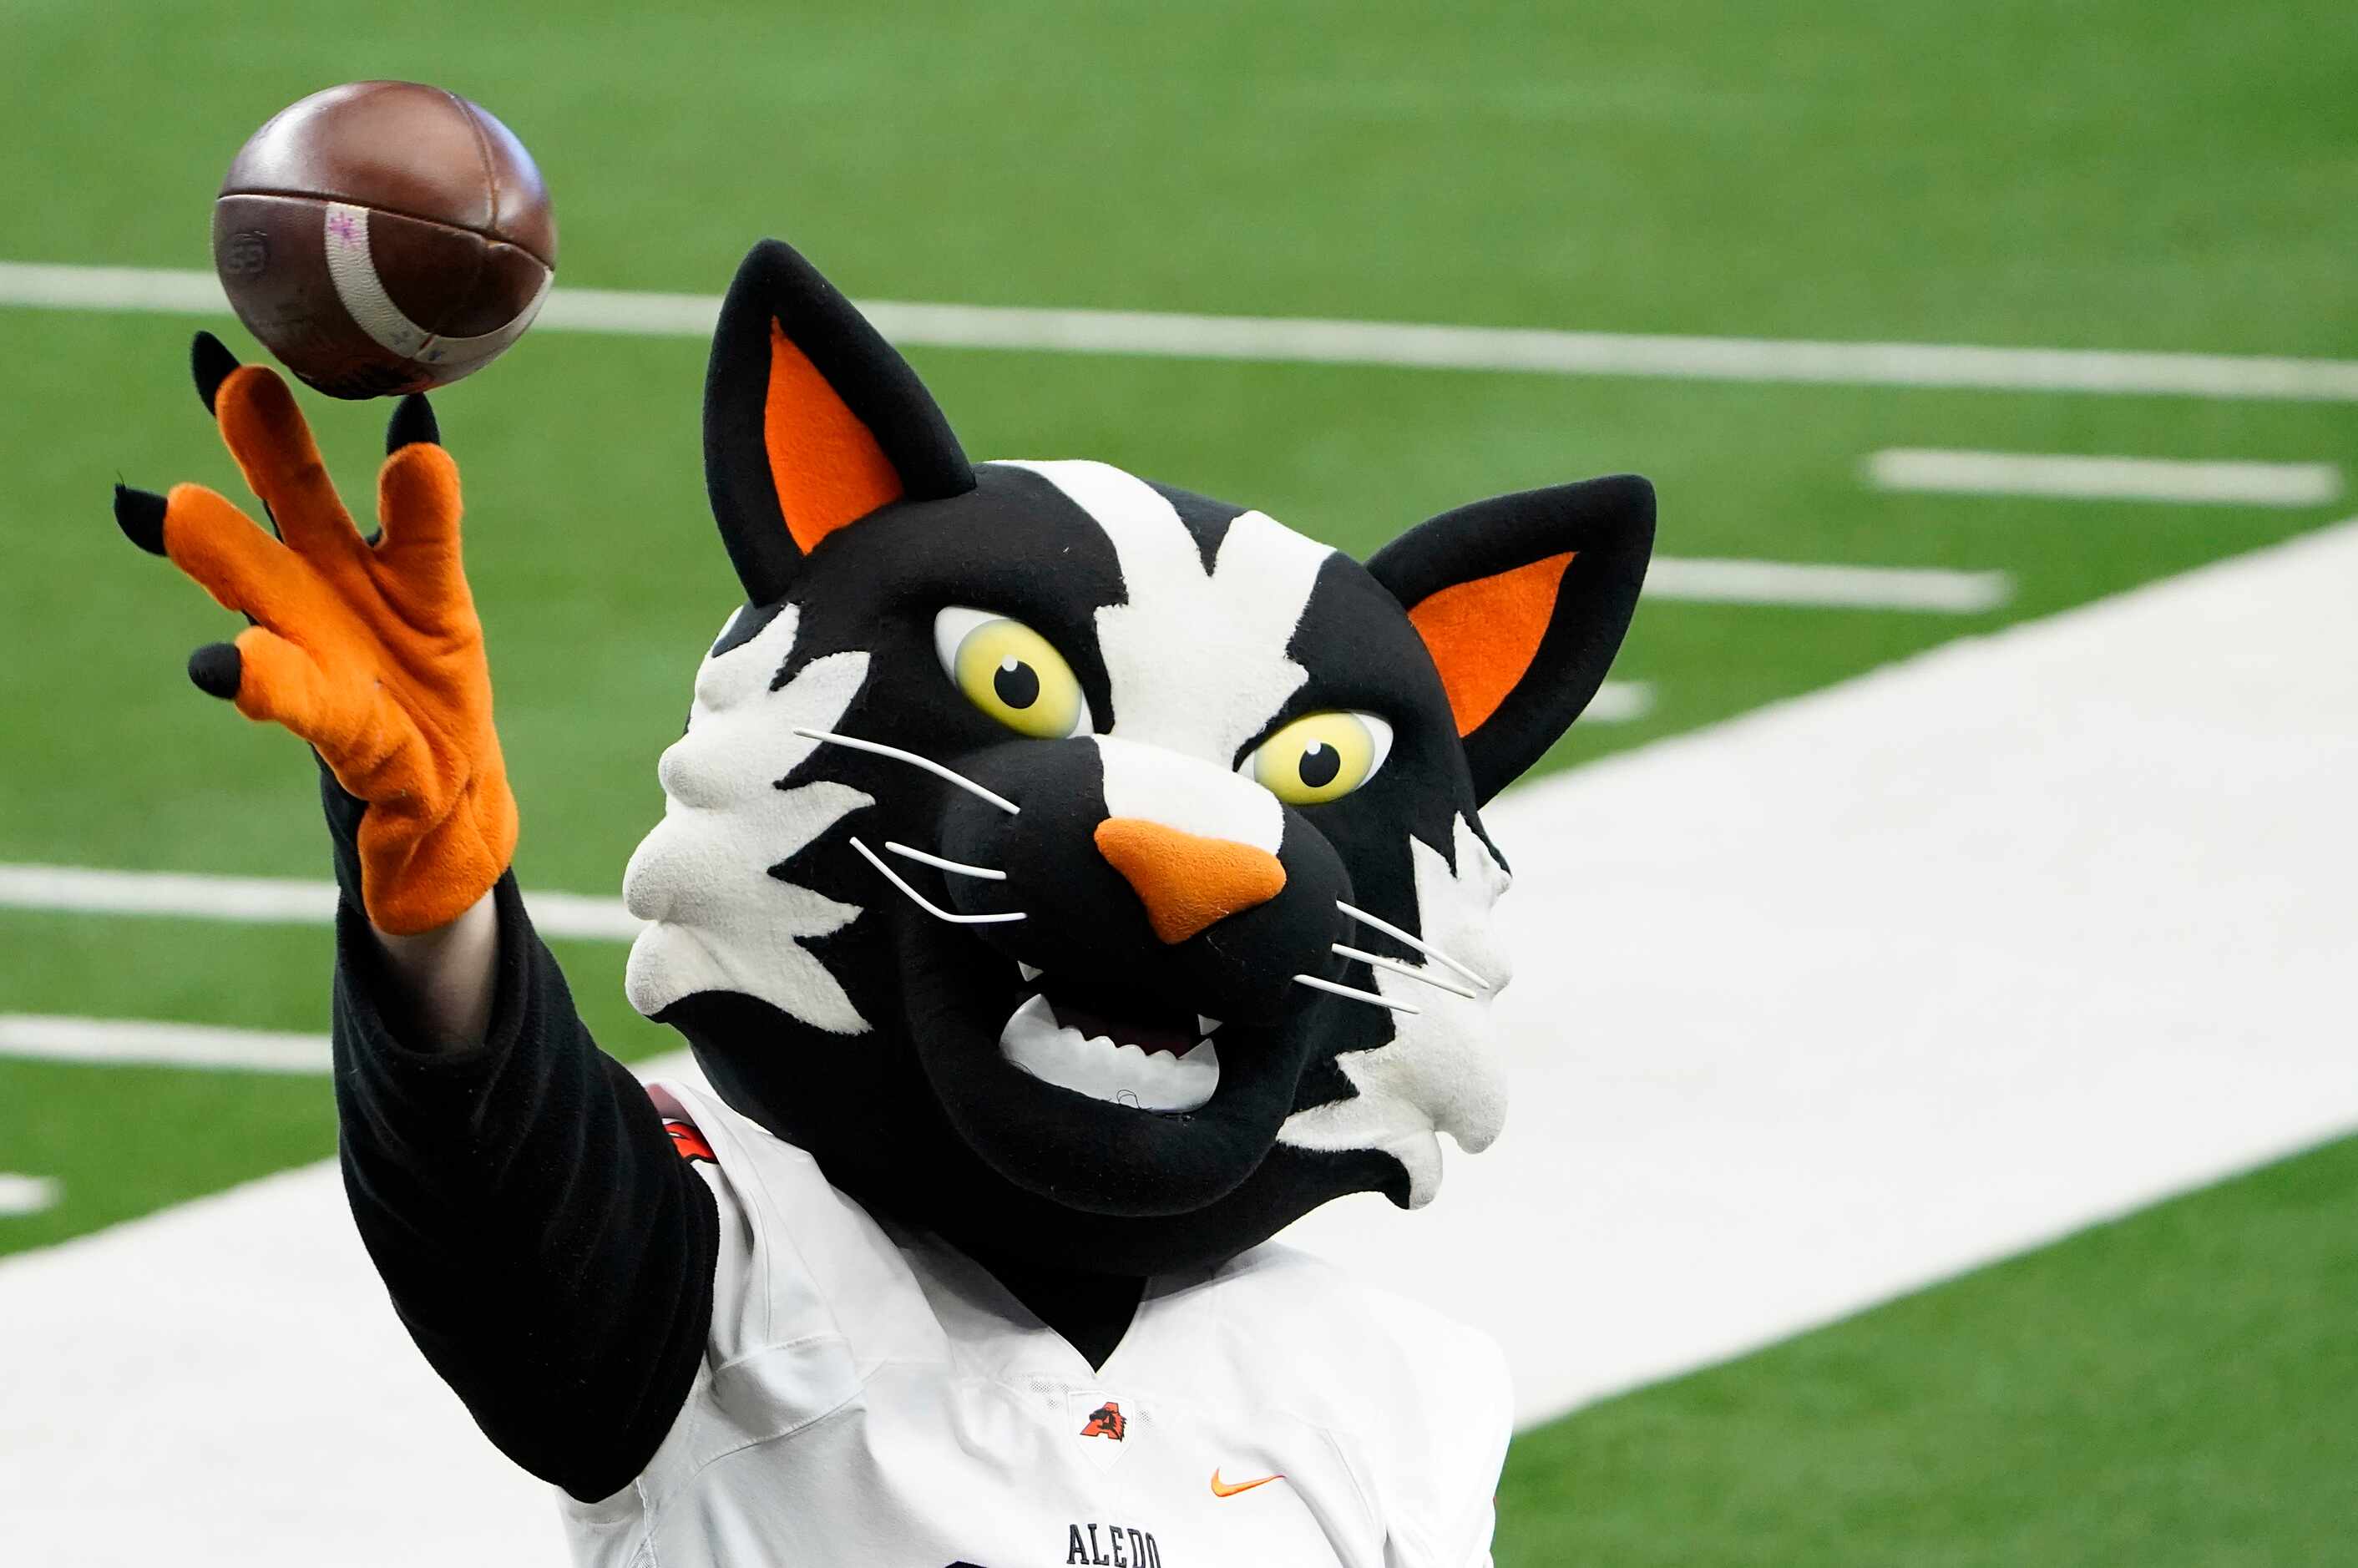 The Aledo mascot tosses a ball on the sidelines during the first half of the Class 5A...